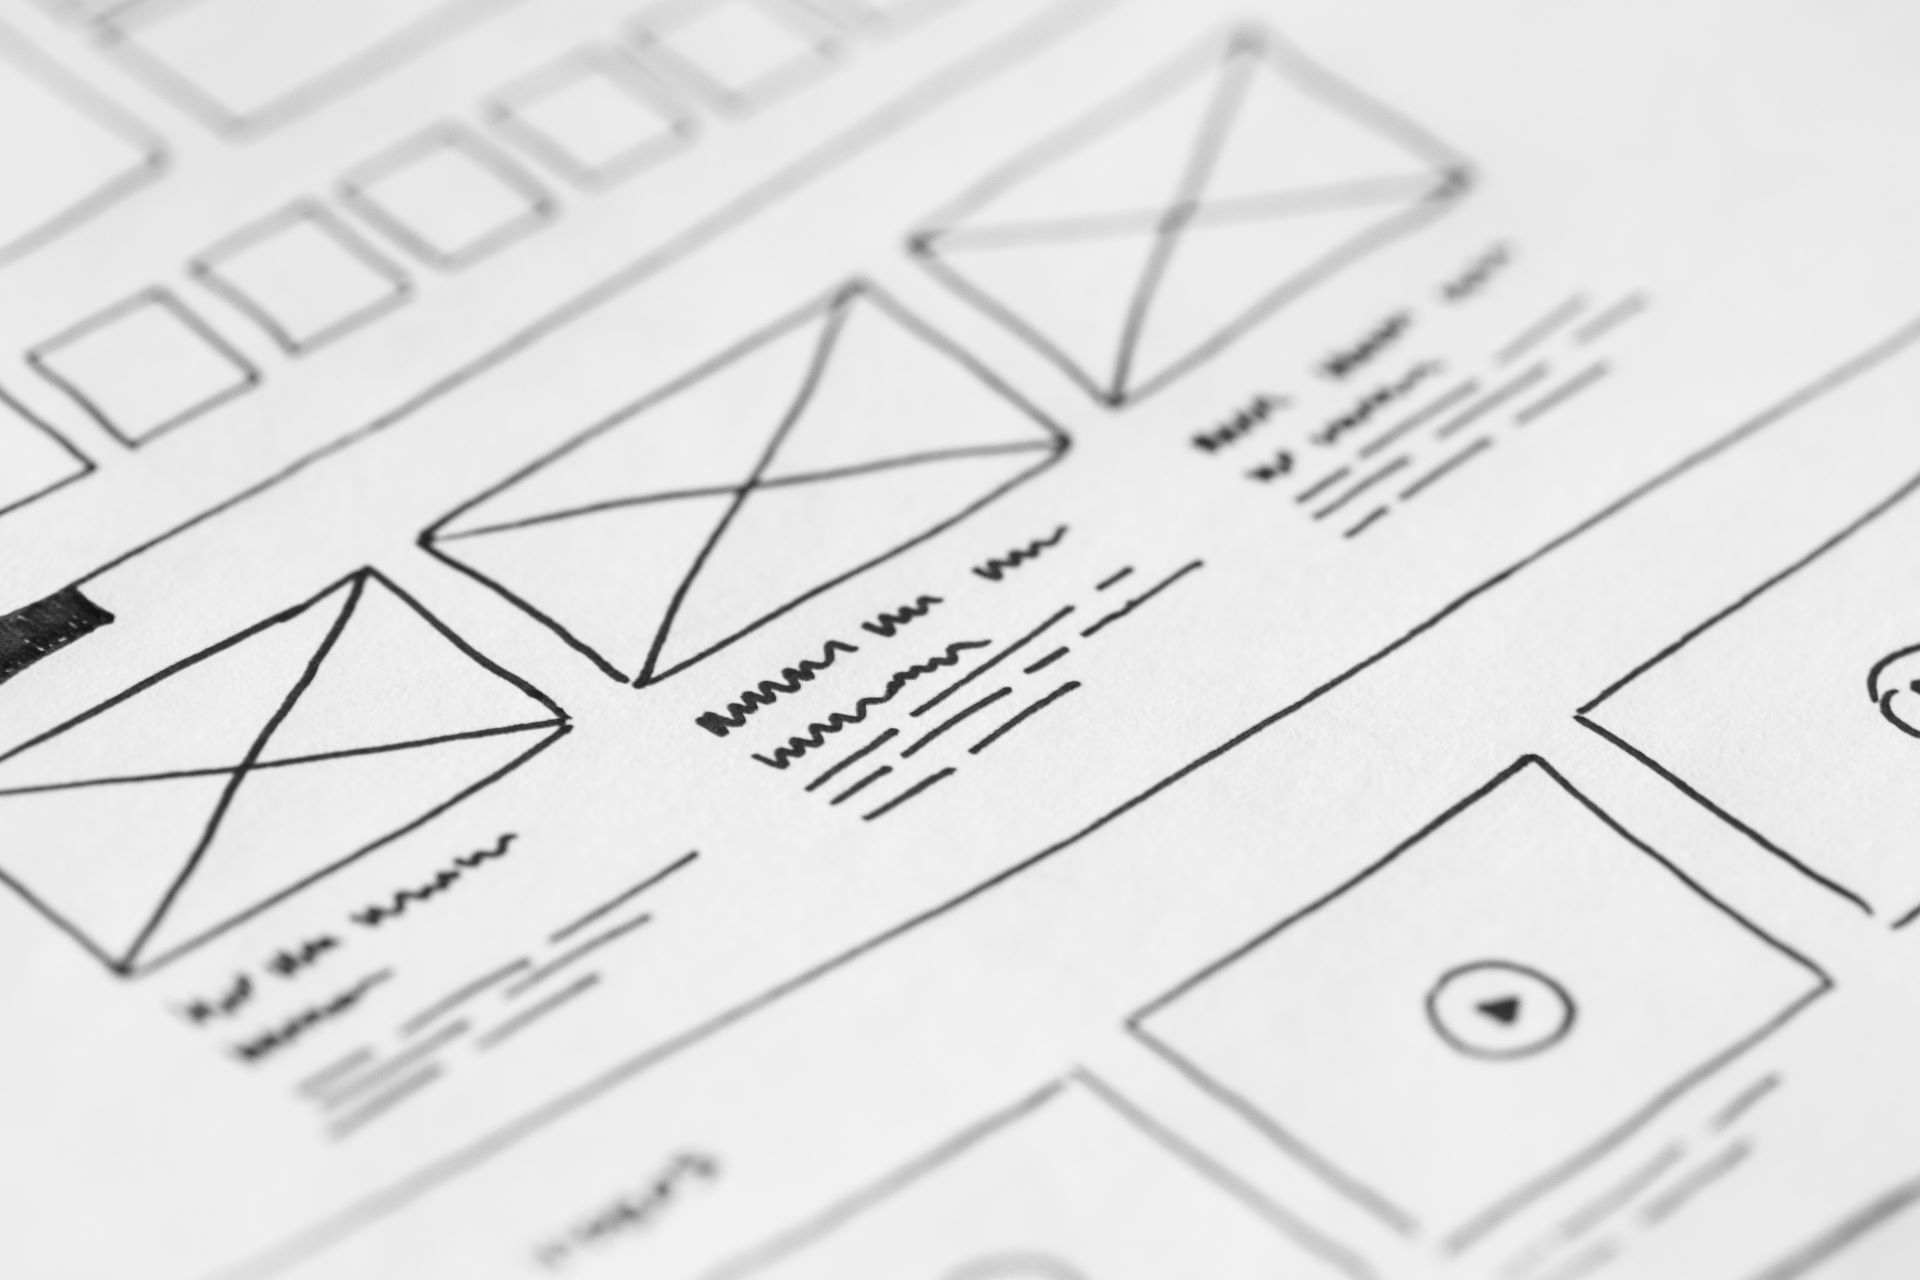 A photo of website wireframes hand drawn on a piece of paper.